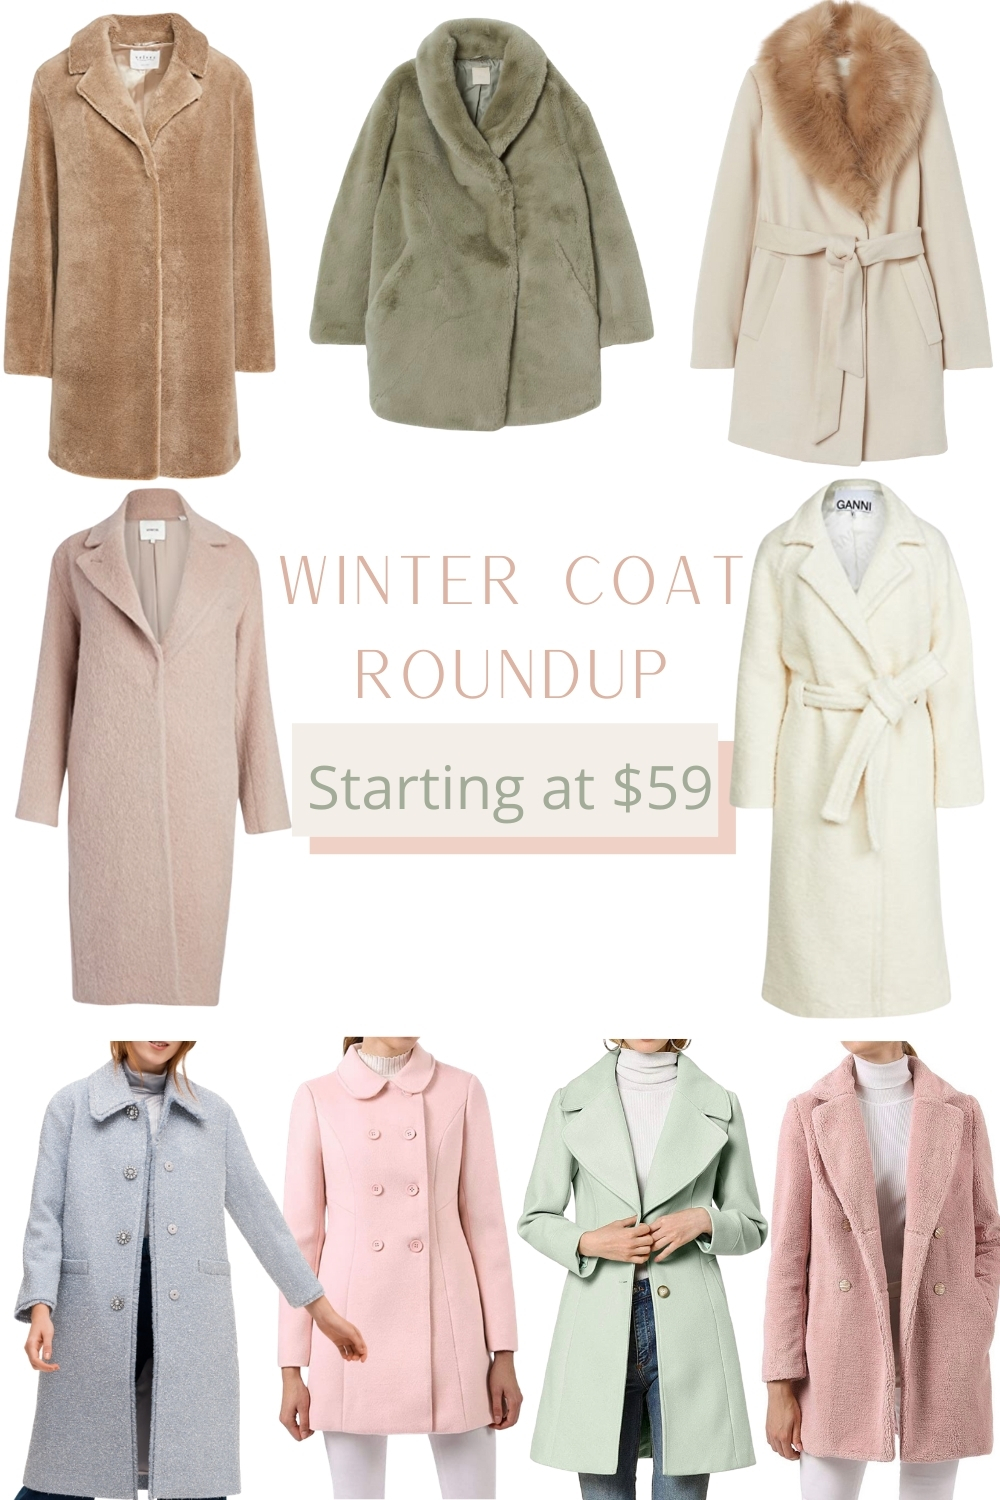 The cutest winter coats for cold weather 2020